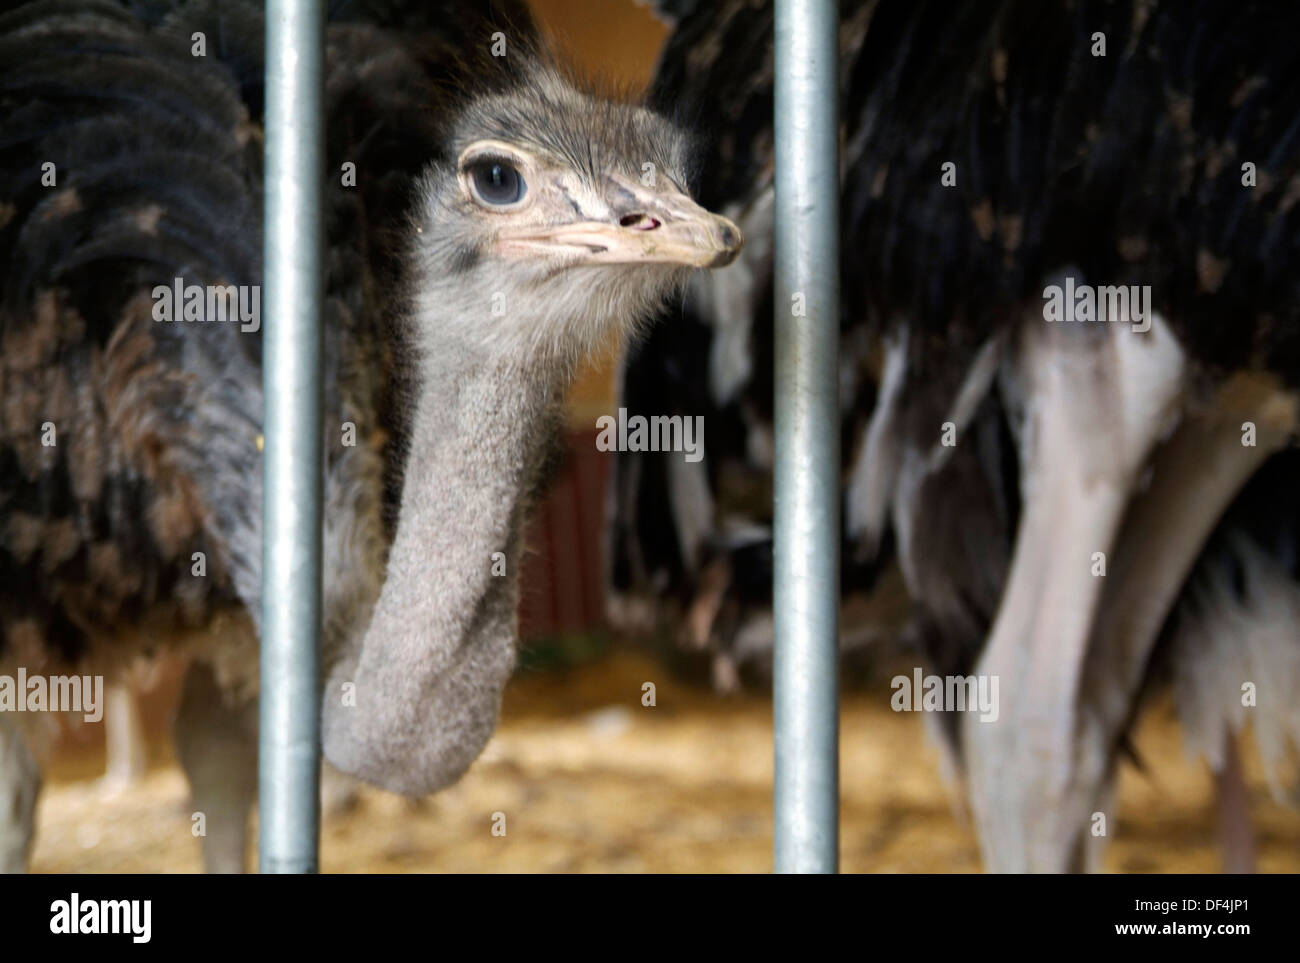 Ostrich Behind Bars Stock Photo